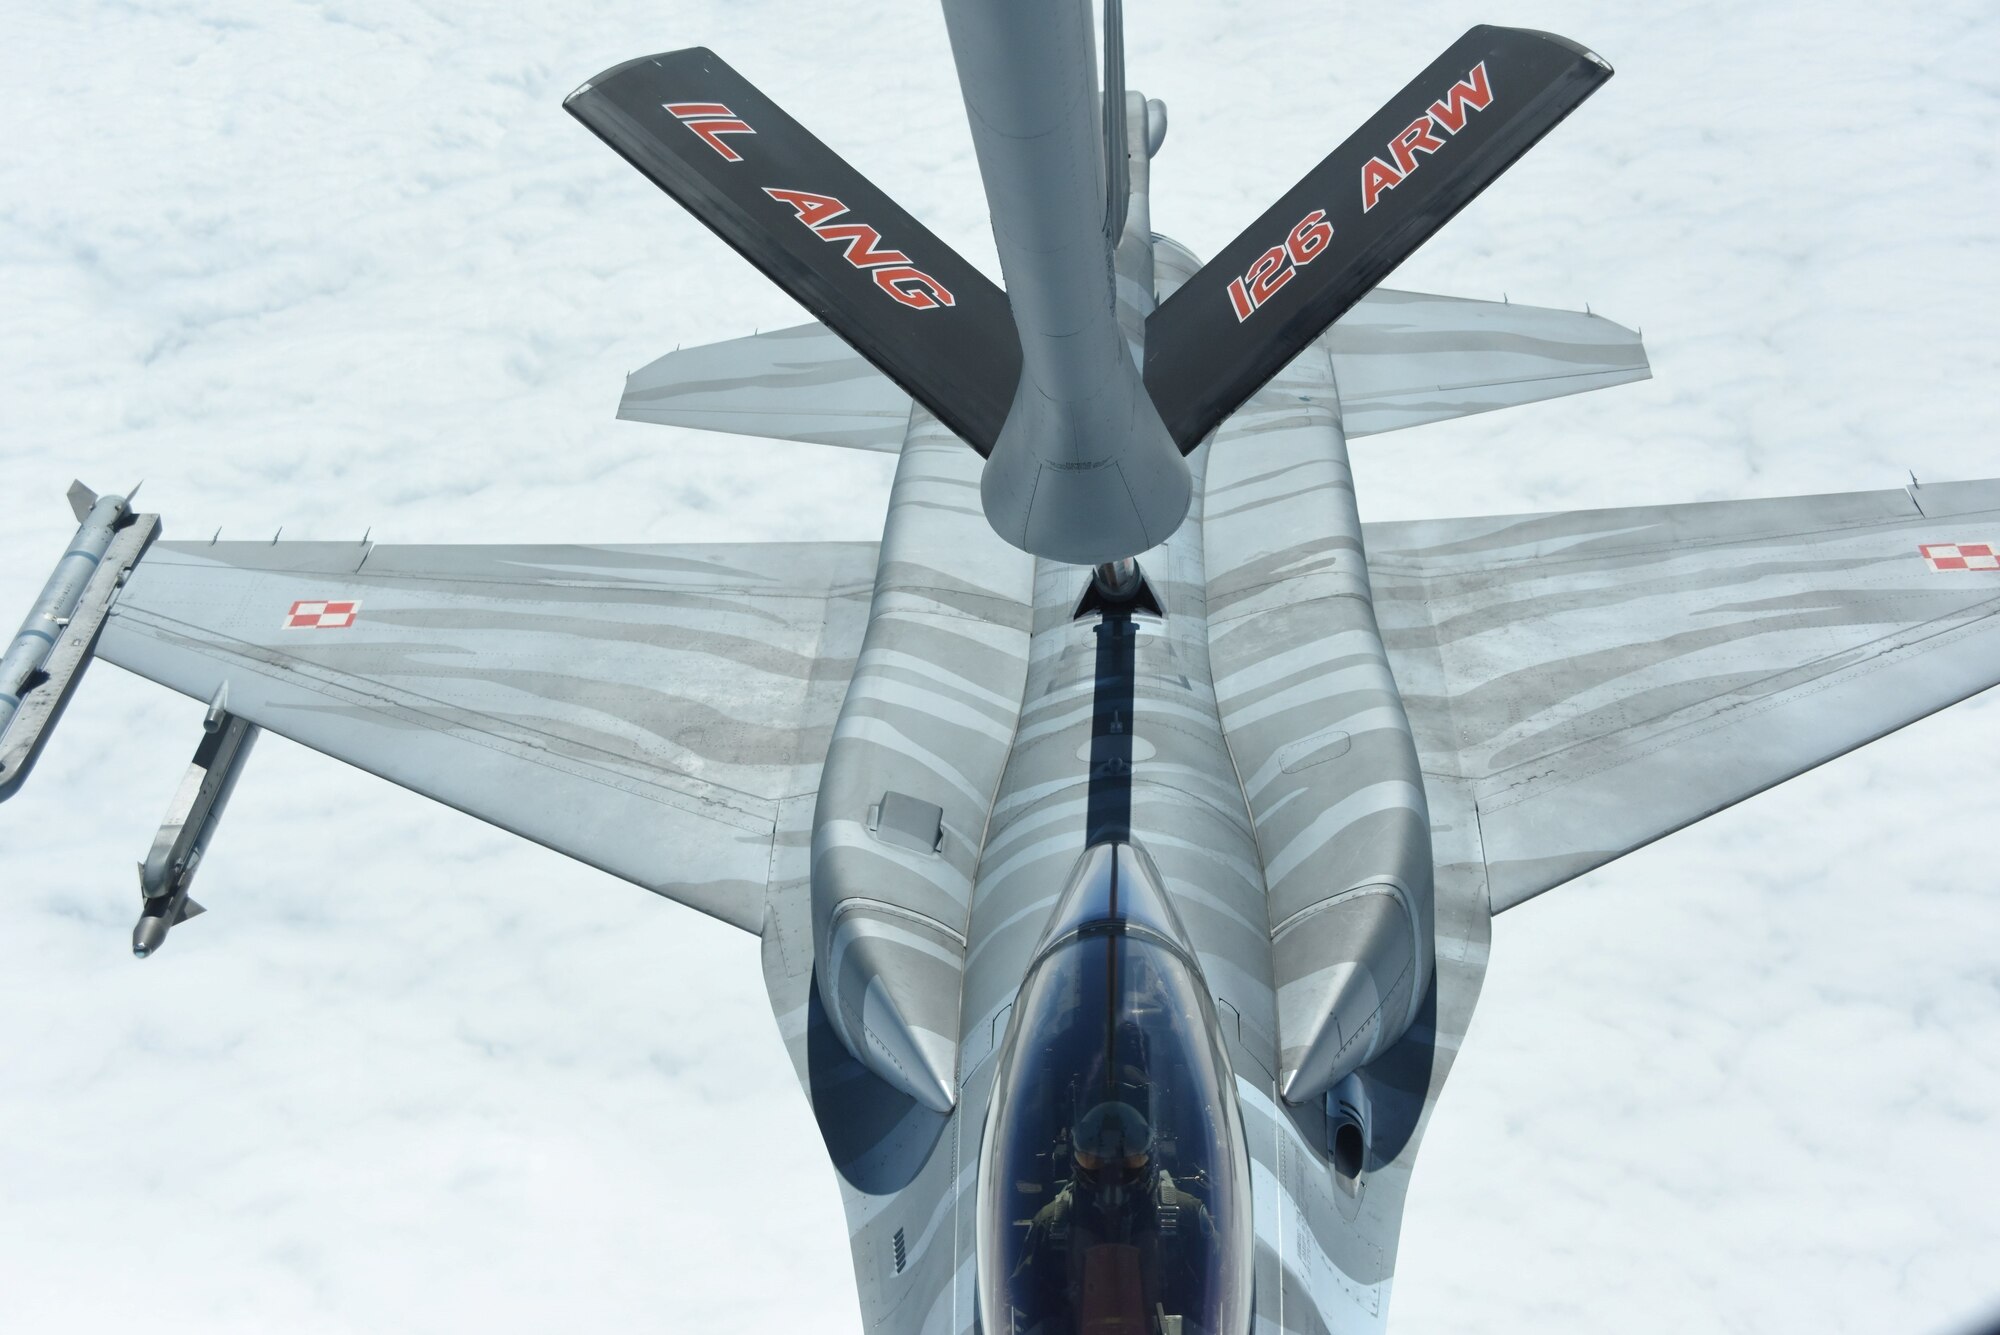 A Polish Air Force F-16 crew trains in aerial refueling with a U.S. Air Force KC-135.